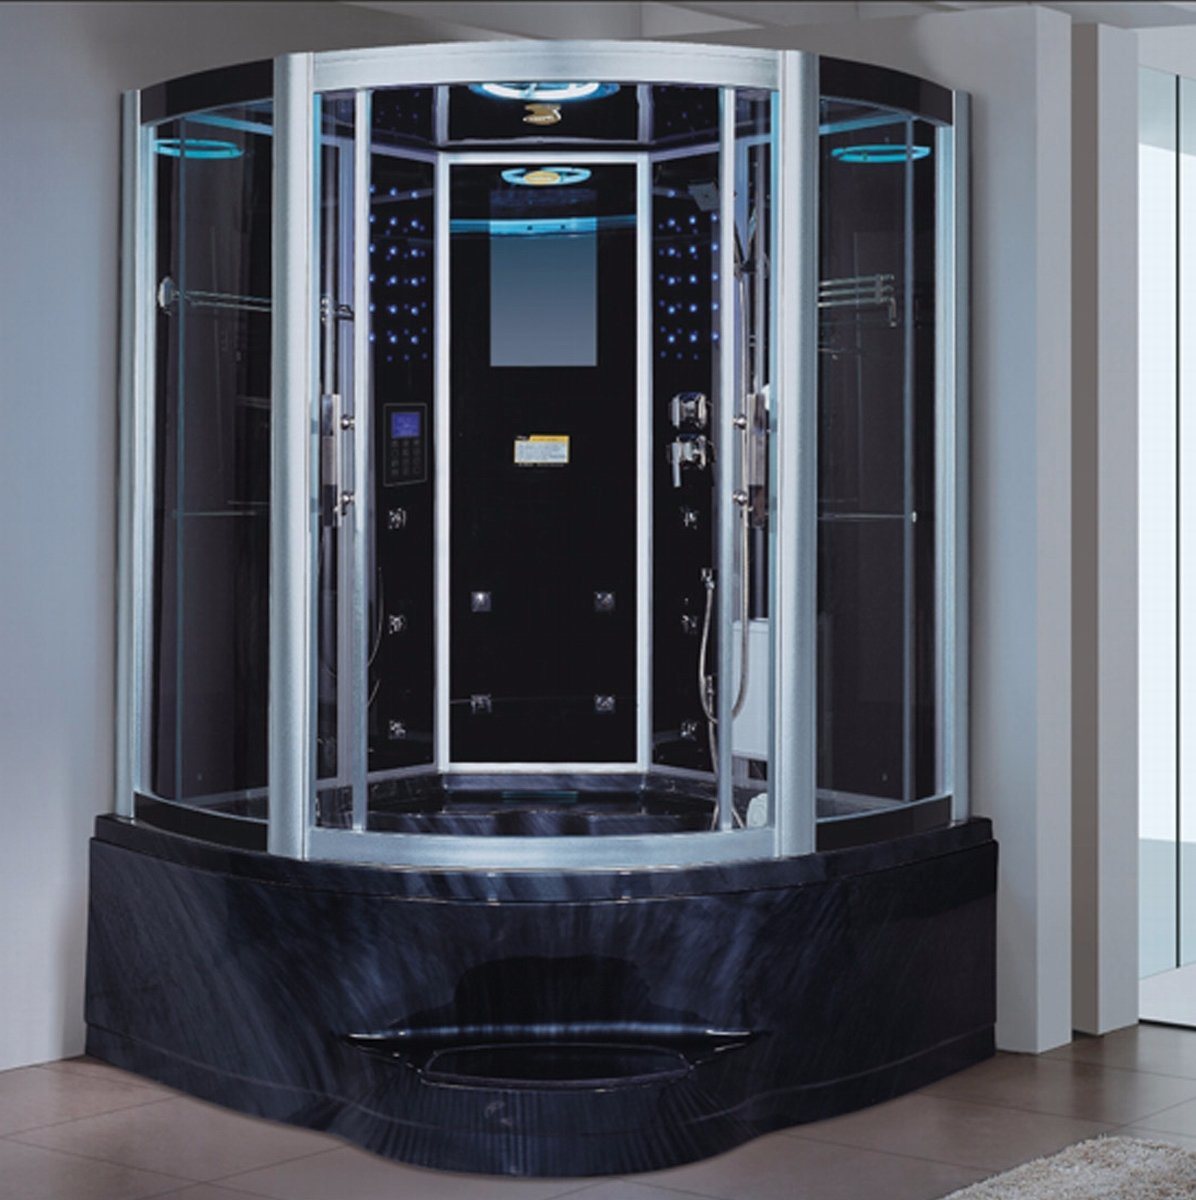 1350mm Sector Black Cloudy Steam Sauna with Jacuzzi (AT-GT0201F)